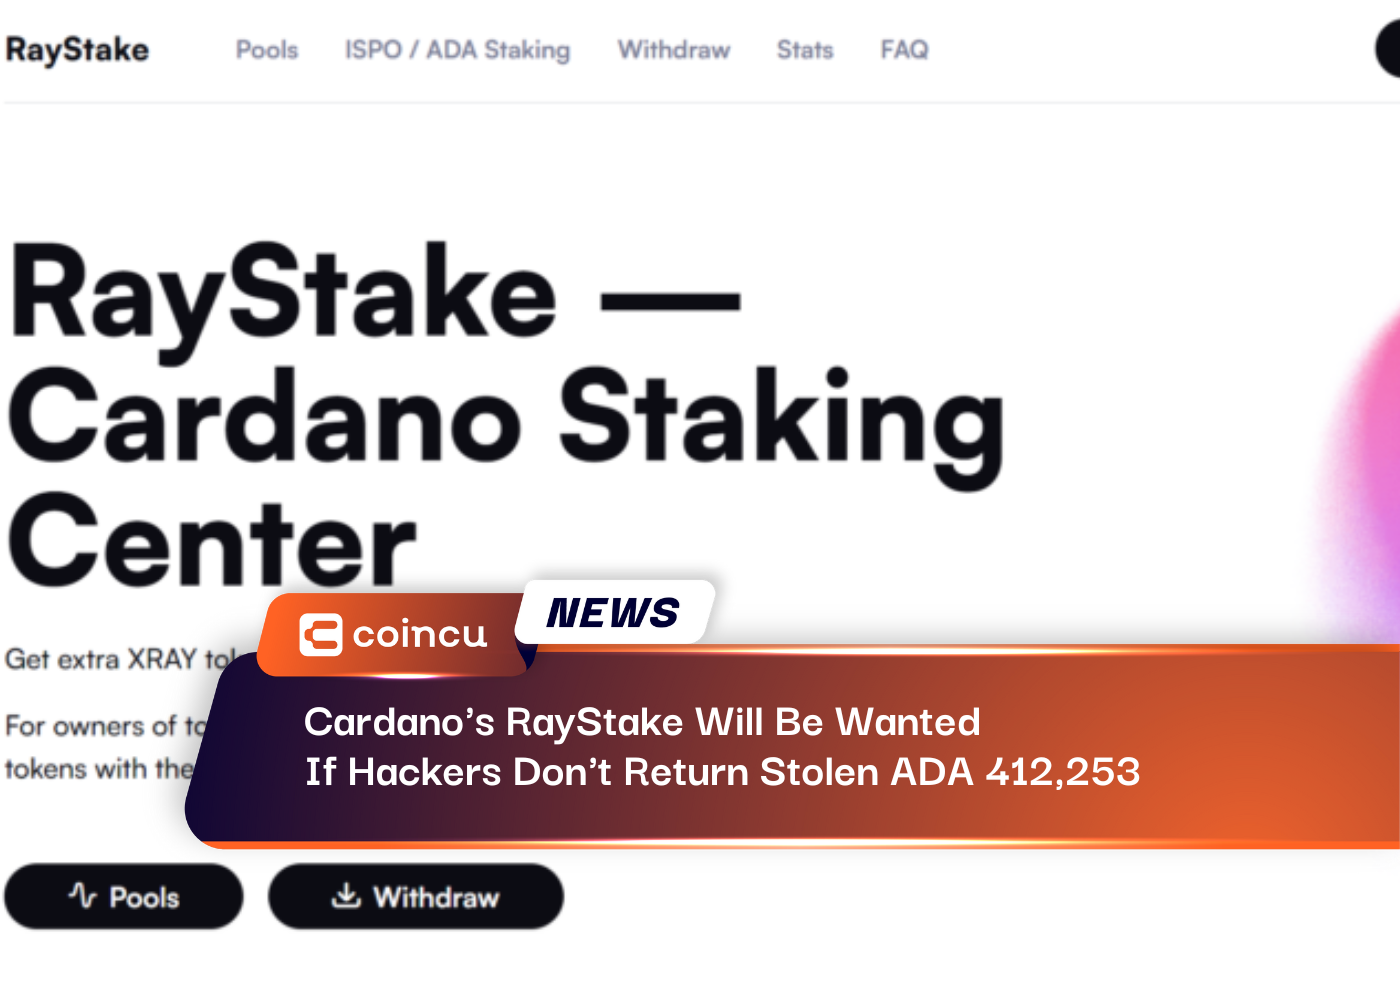 Cardano's RayStake Will Be Wanted If Hackers Don't Return Stolen ADA 412,253